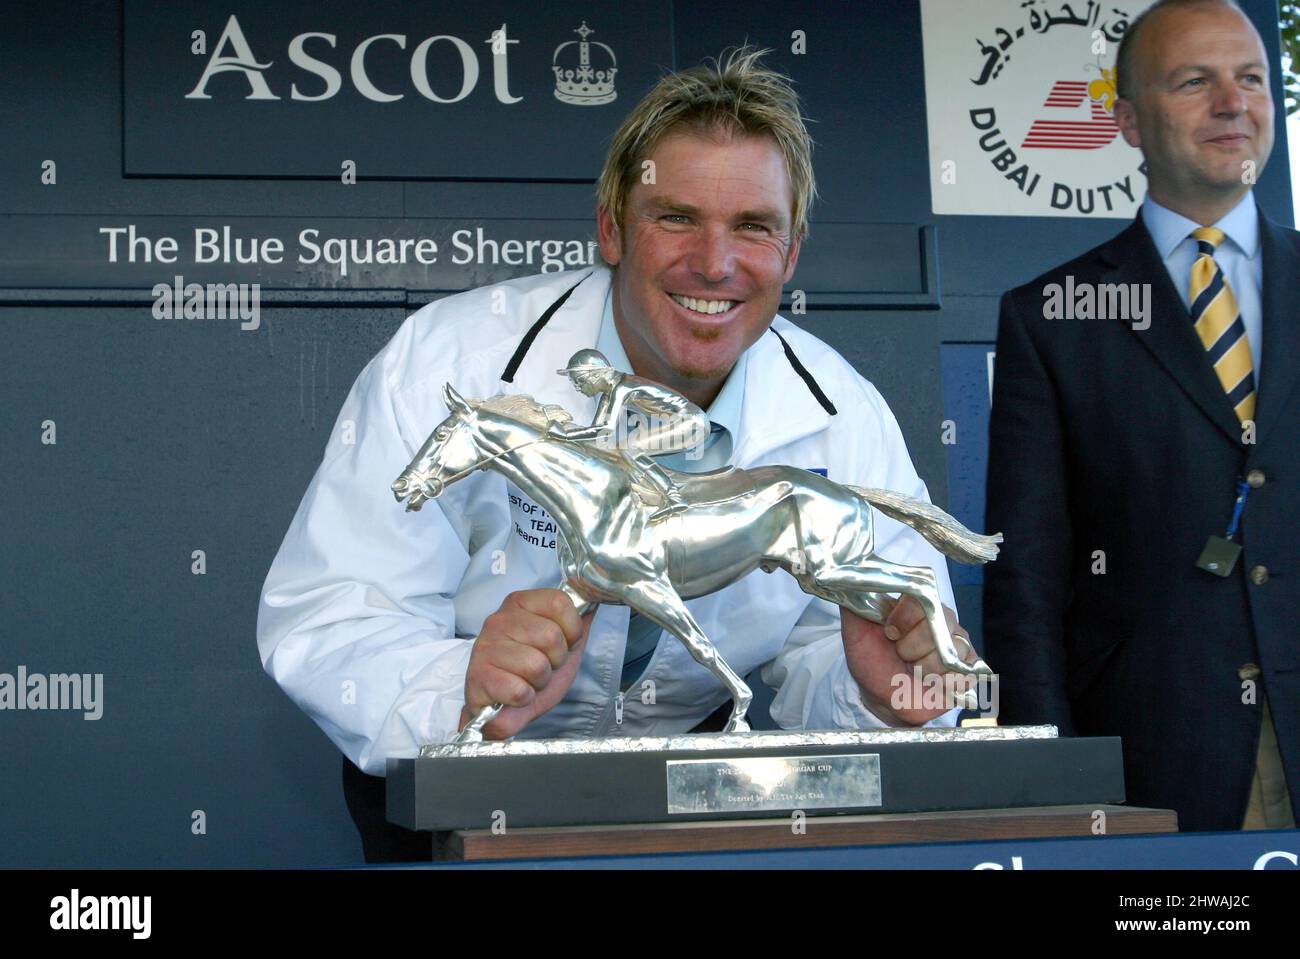 7 August 2004: Dubai Duty Free Rest of the World Team Leader SHANE WARNE with the trophy at the presentation after their victory in The Blue Square Shergar Cup at Ascot. Photo: Neil Tingle/action plus.horse racing 040807 joy celebrate celebrates winner winners trophies cricket. Stock Photo